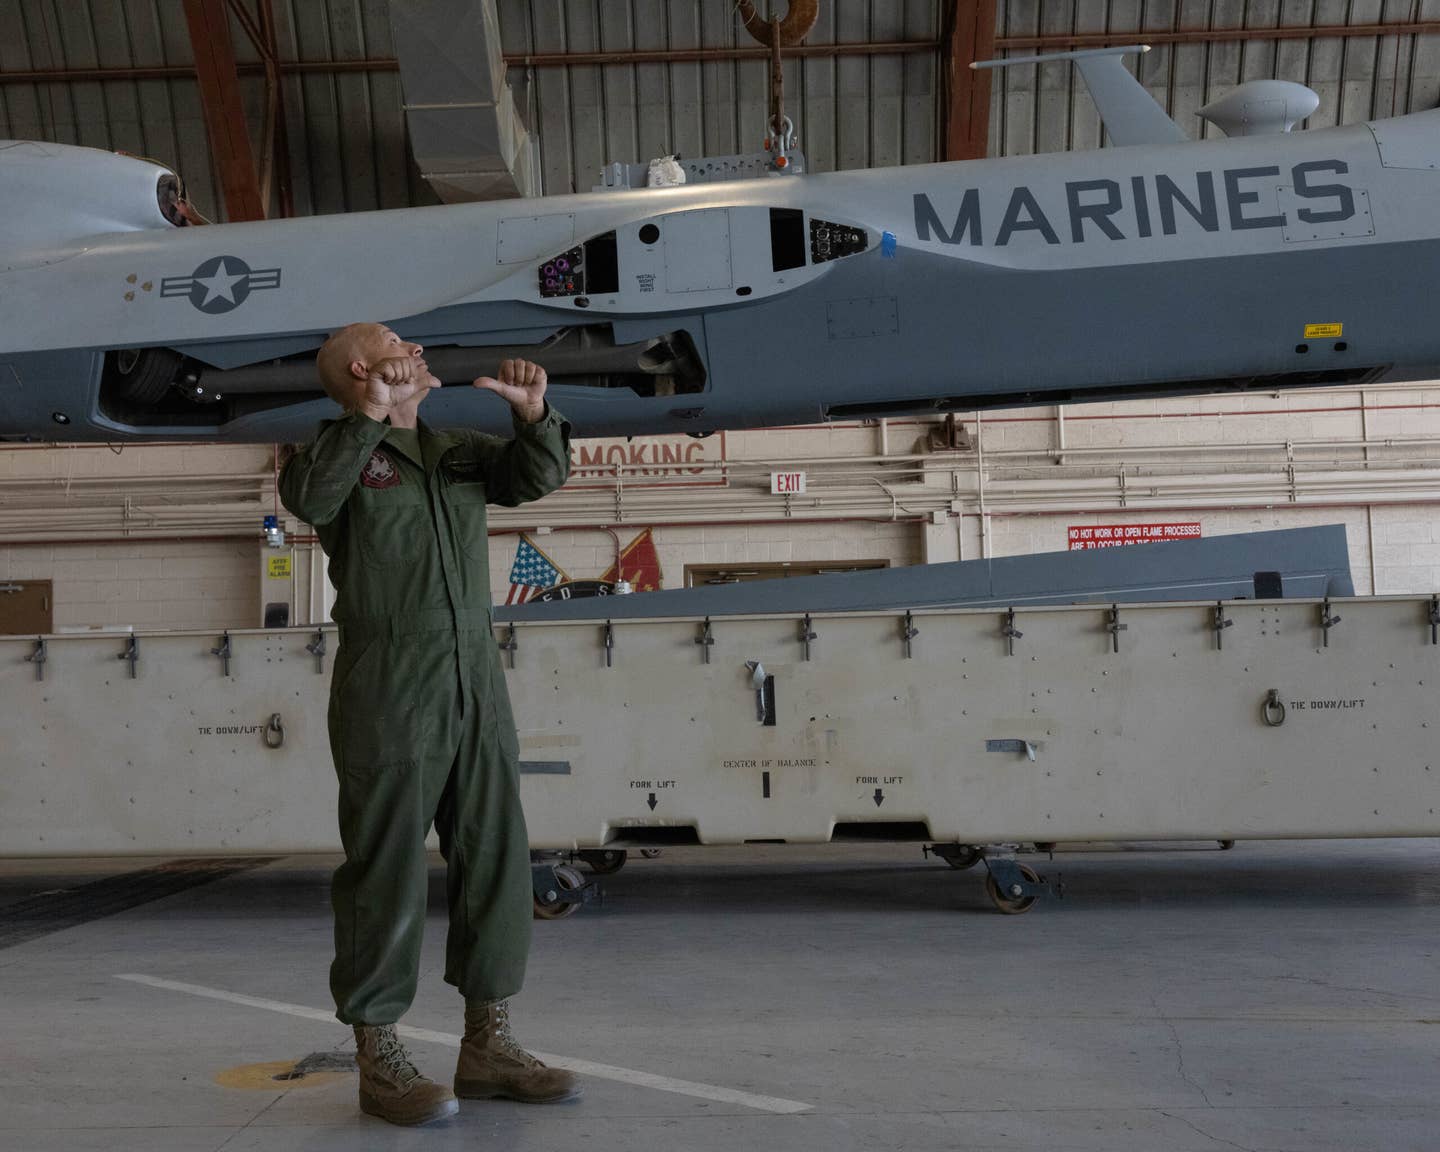 U.S. Marine Corps Staff Sgt. Ricardo Tijerina, airframes staff noncommissioned officer, Marine Operational Test and Evaluation Squadron (VMX) 1, assists in the unloading of the MQ-9A Reaper with Marine Unmanned Aerial Vehicle Squadron (VMU) 1, Marine Aircraft Group 13, 3rd Marine Aircraft Wing, at Marine Corps Air Station (MCAS) Yuma, Ariz., Sept. 28, 2022. The disassembly, transport, and reassembly of the platform between MCAS Yuma and MCAS Miramar, Calif. via a U.S. Marine Corps KC-130J Hercules aircraft served as a proof of concept for the Reaper's rapid, expeditionary deployment capacity. (U.S. Marine Corps photo by Lance Cpl. Jade Venegas)